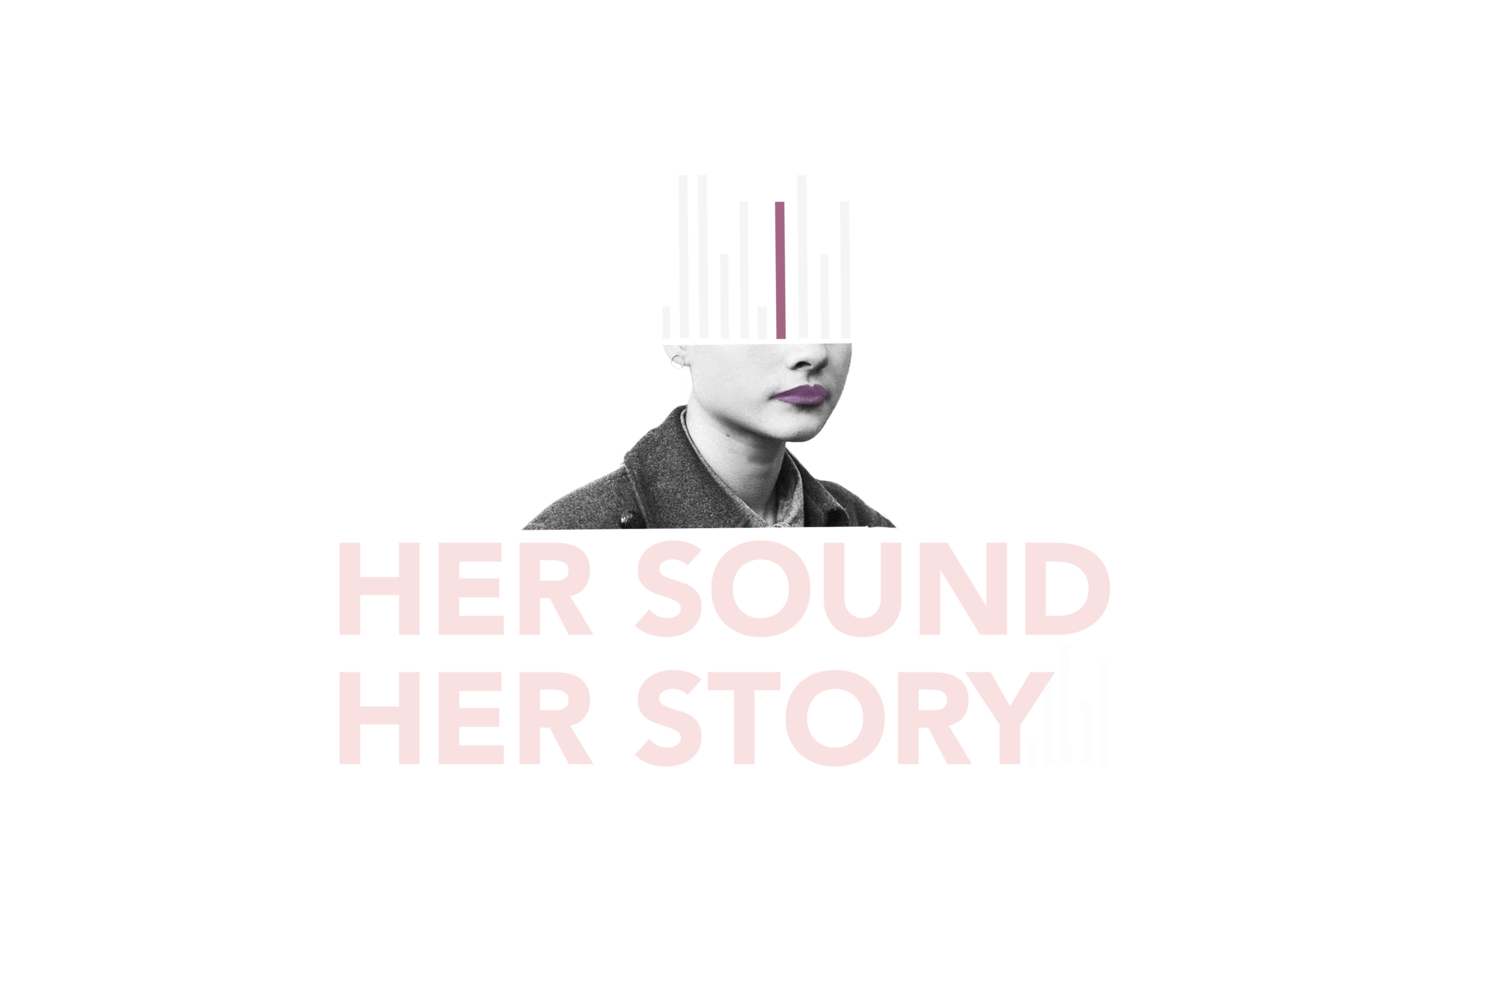 Her Sound Her Story